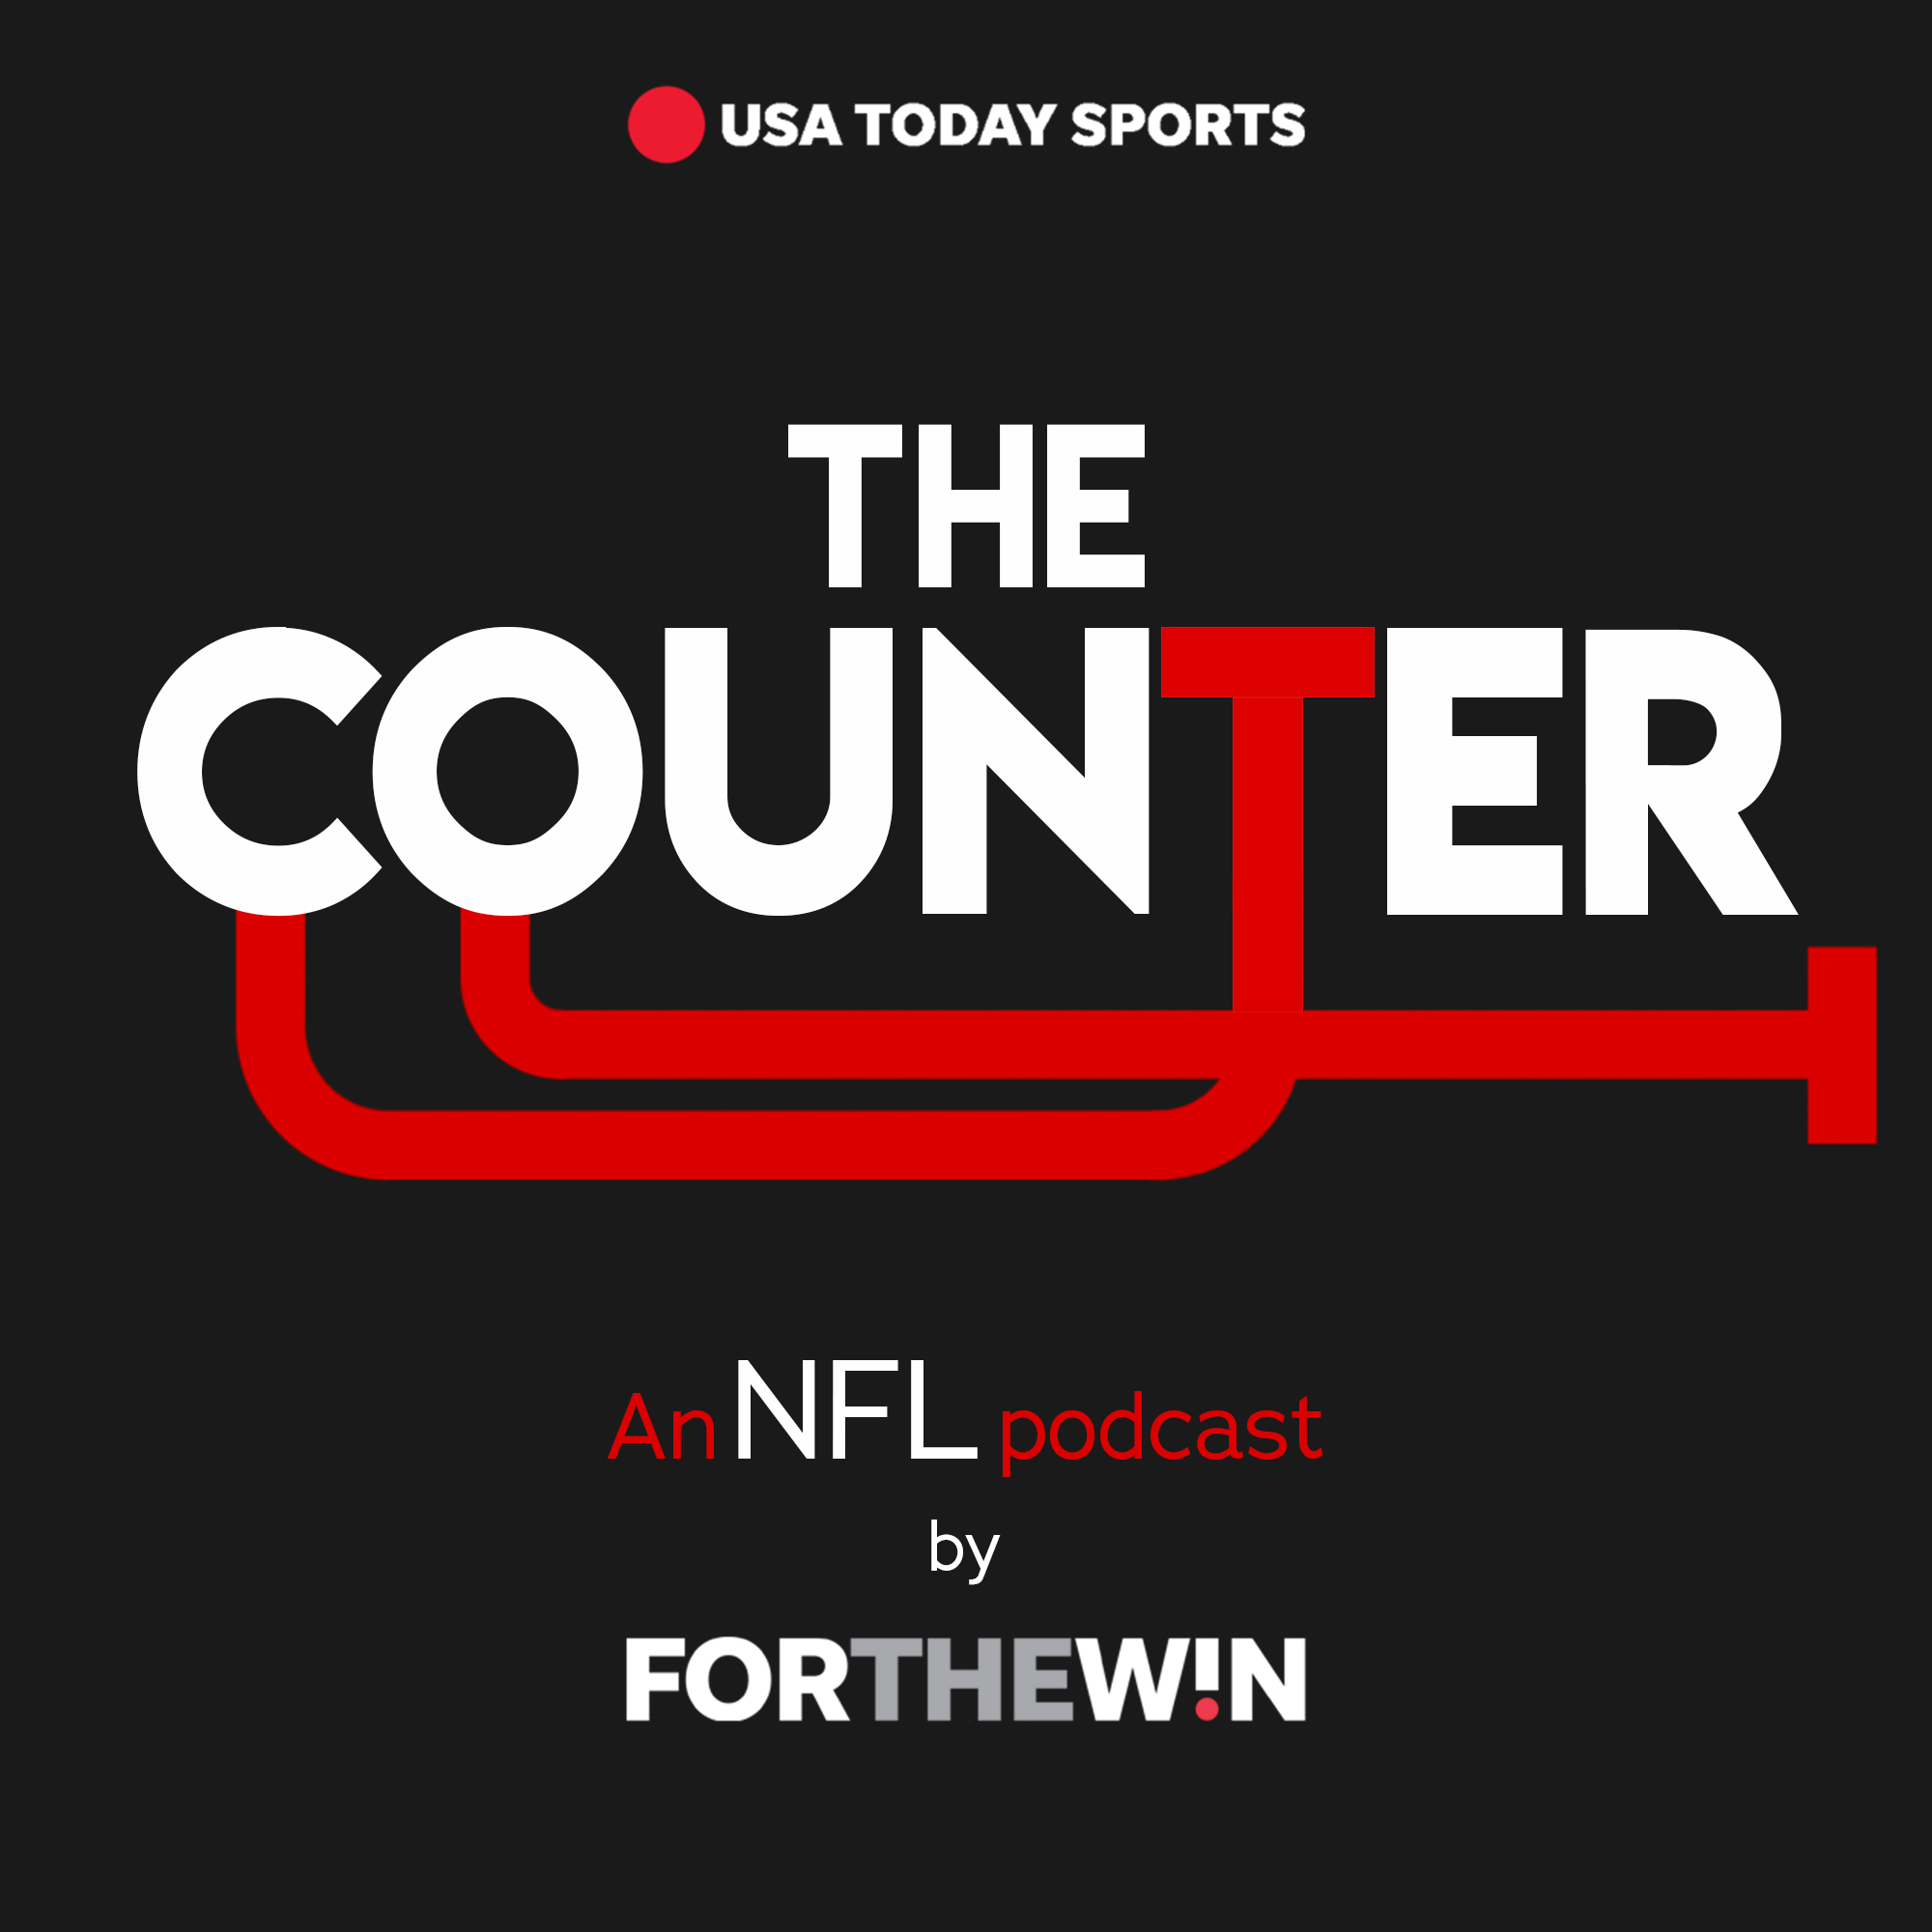 The Counter: An NFL Podcast by For The Win - The Super Bowl matchup is set ... but it's been overshadowed